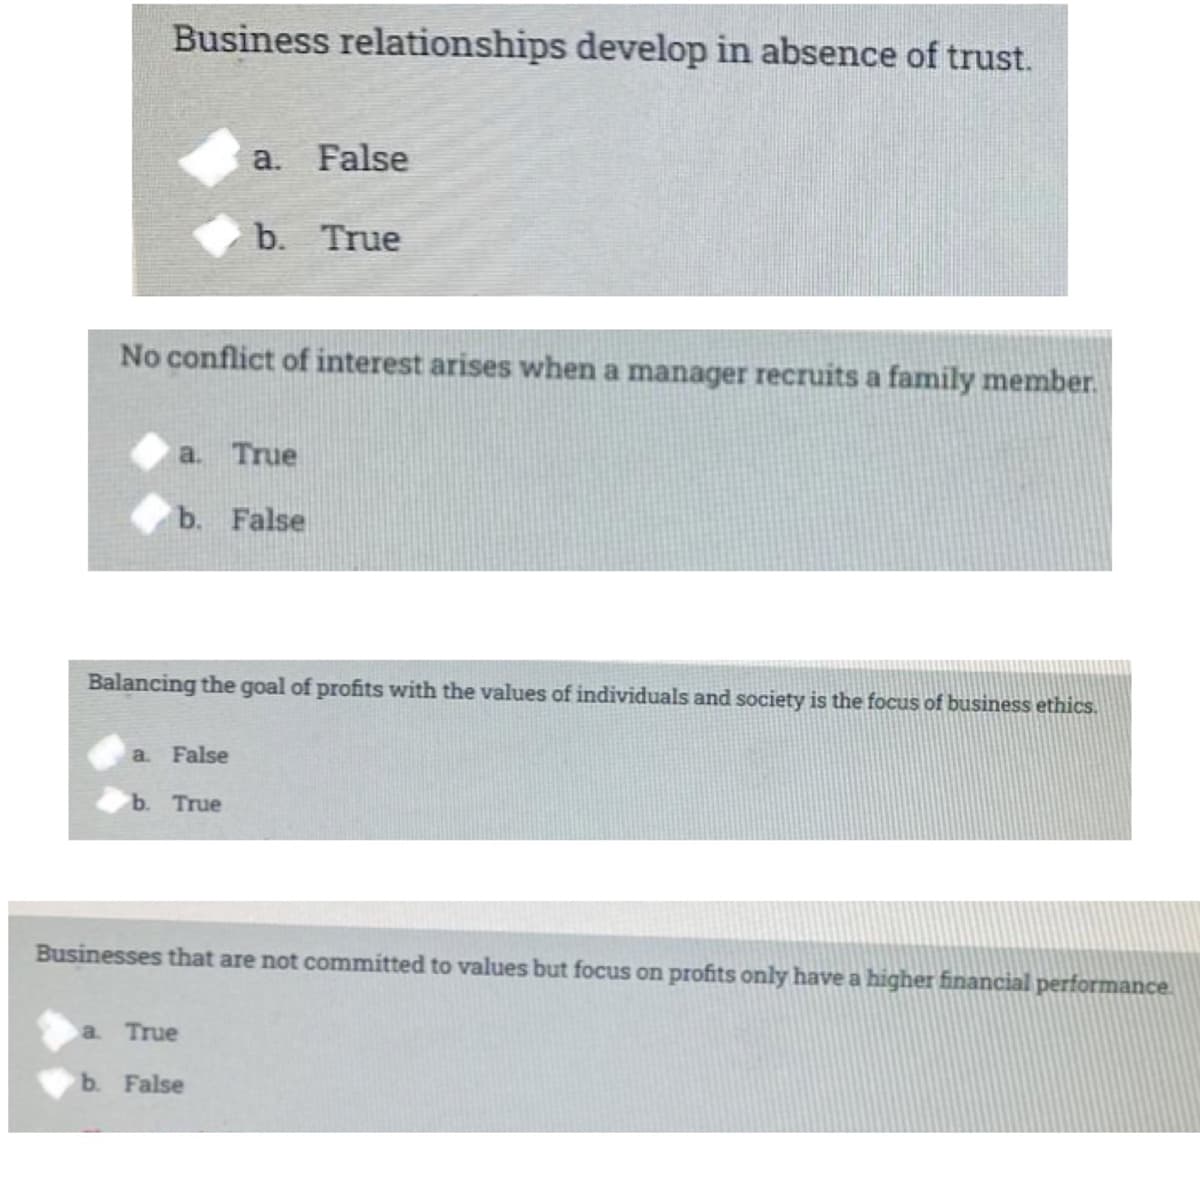 Business relationships develop in absence of trust.
a. False
b.
True
No conflict of interest arises when a manager recruits a family member.
a. True
b. False
Balancing the goal of profits with the values of individuals and society is the focus of business ethics.
a. False
b. True
Businesses that are not committed to values but focus on profits only have a higher financial performance.
a. True
b. False
